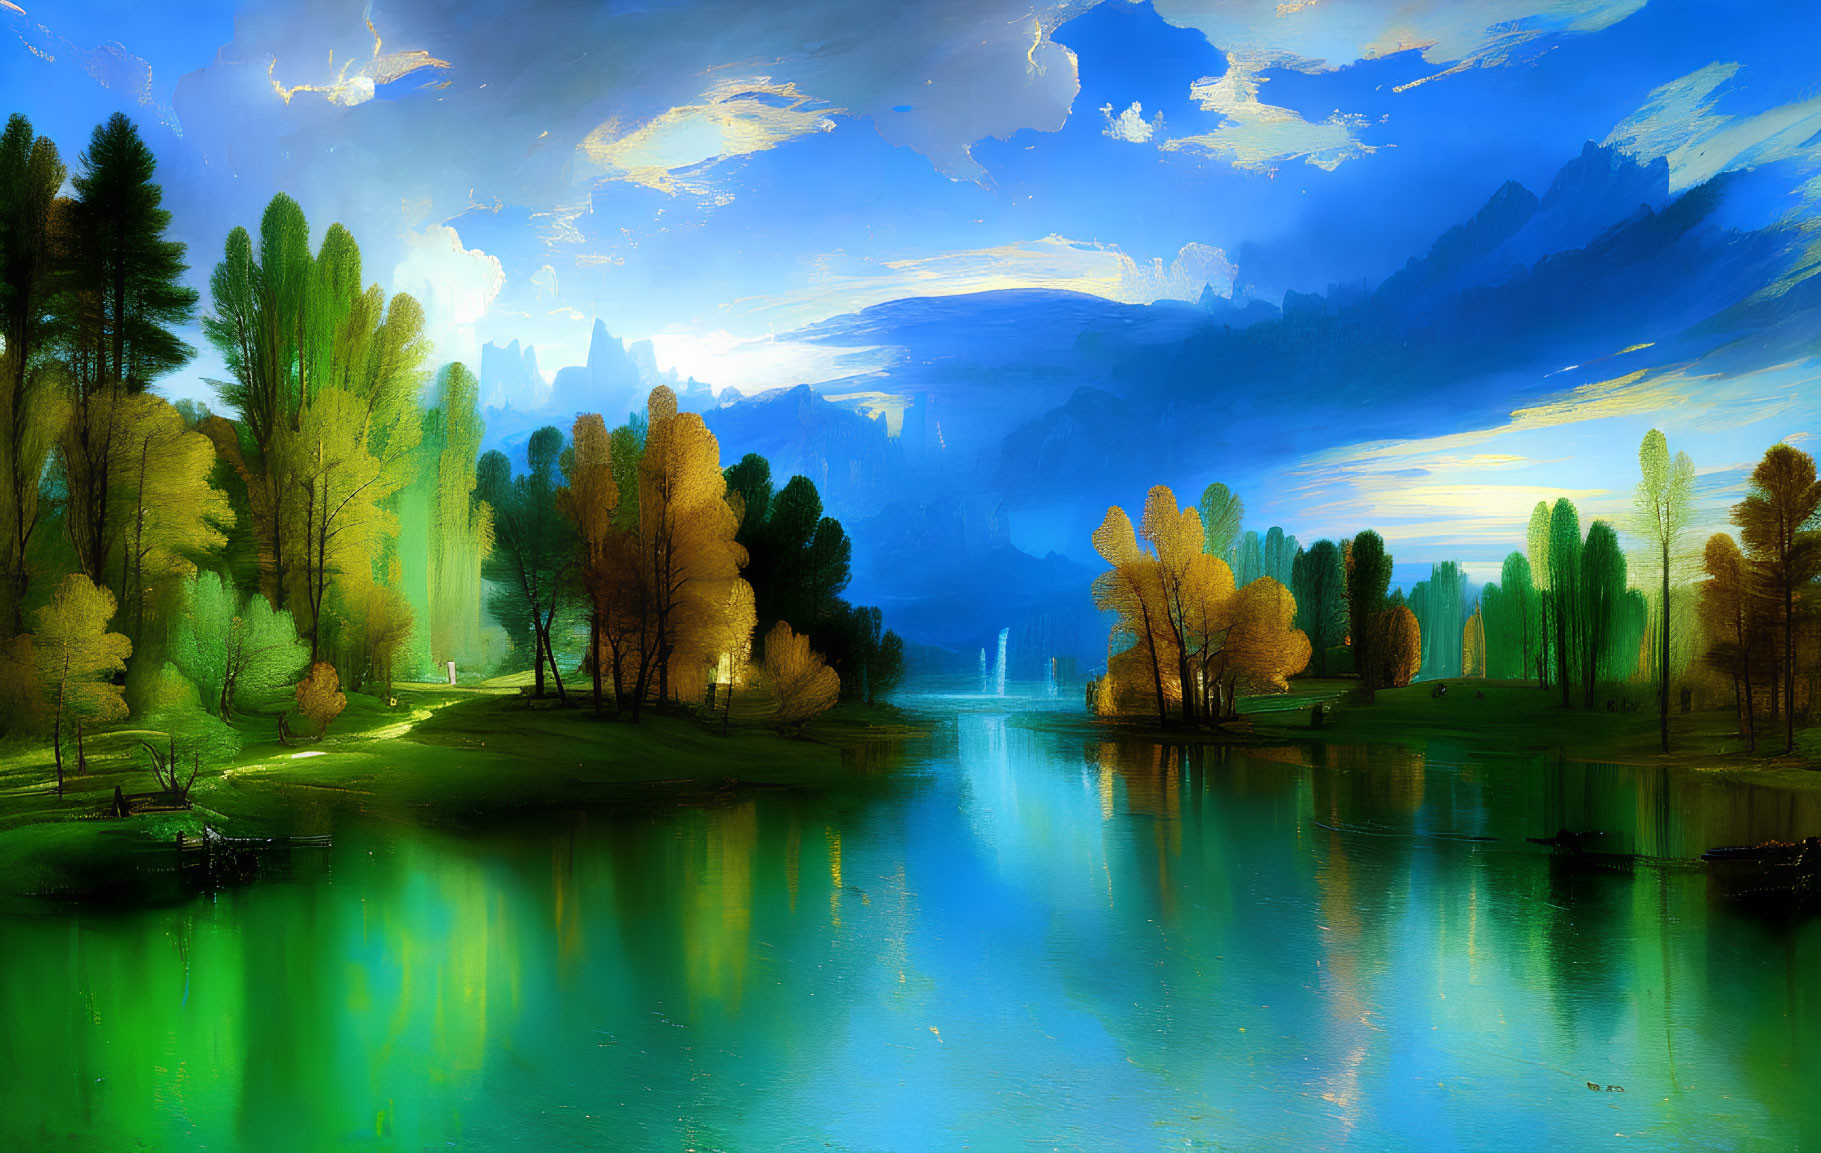 Tranquil landscape painting: river, vibrant reflections, lush trees, distant mountains, blue sky